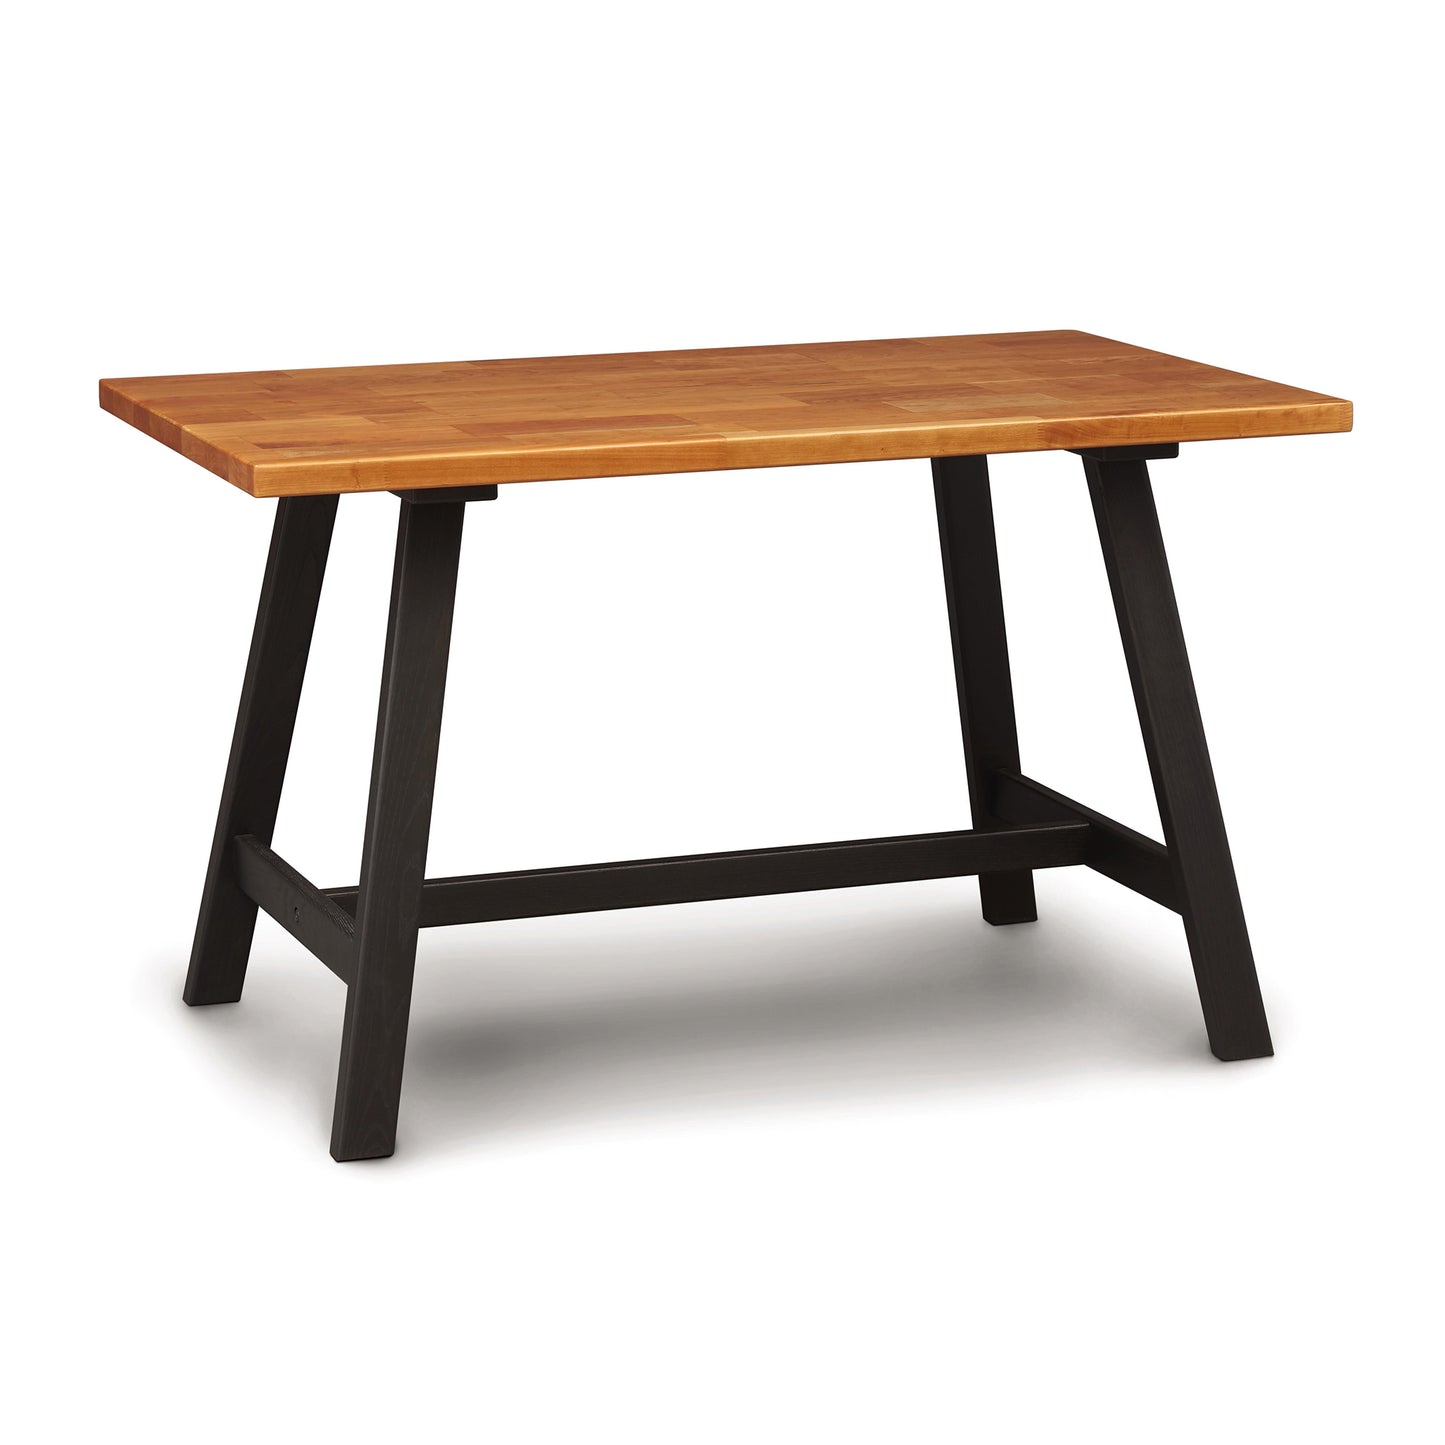 A Copeland Furniture Modern Farmhouse Counter Height Farm Table with black legs and a wooden top.